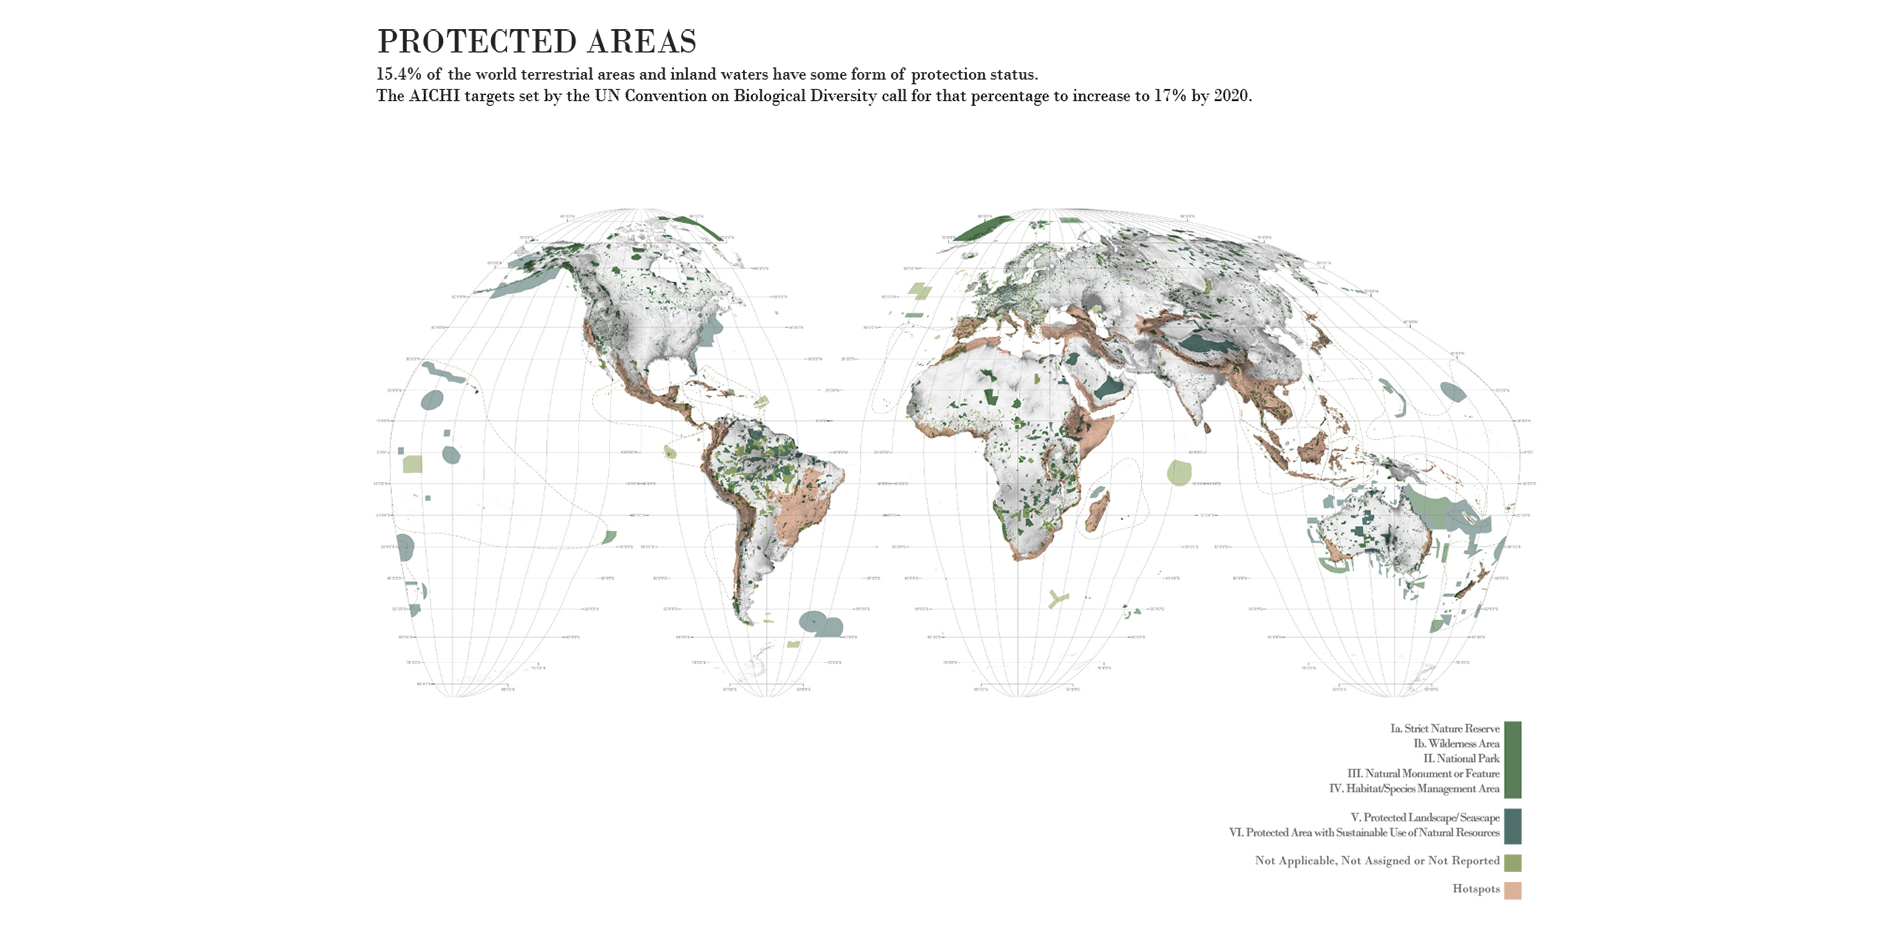 The world's protected areas - currently 15.4 % of global terrestrial area. …